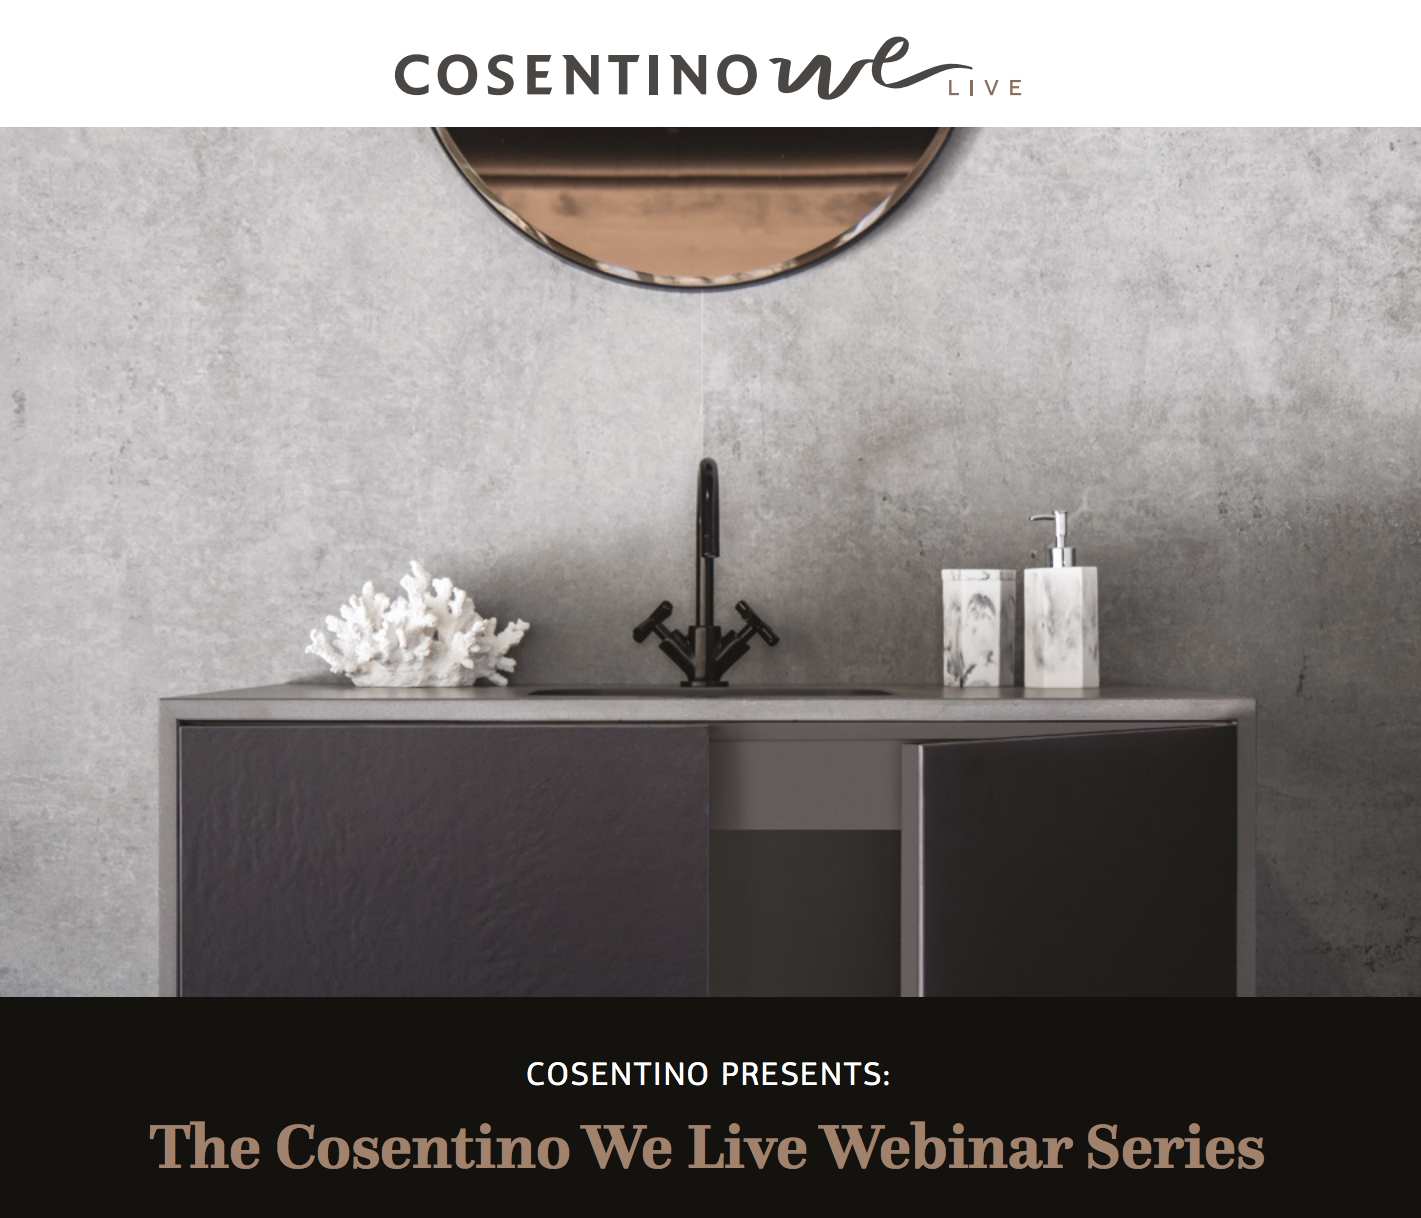 Cosentino UK continues digital outreach plan